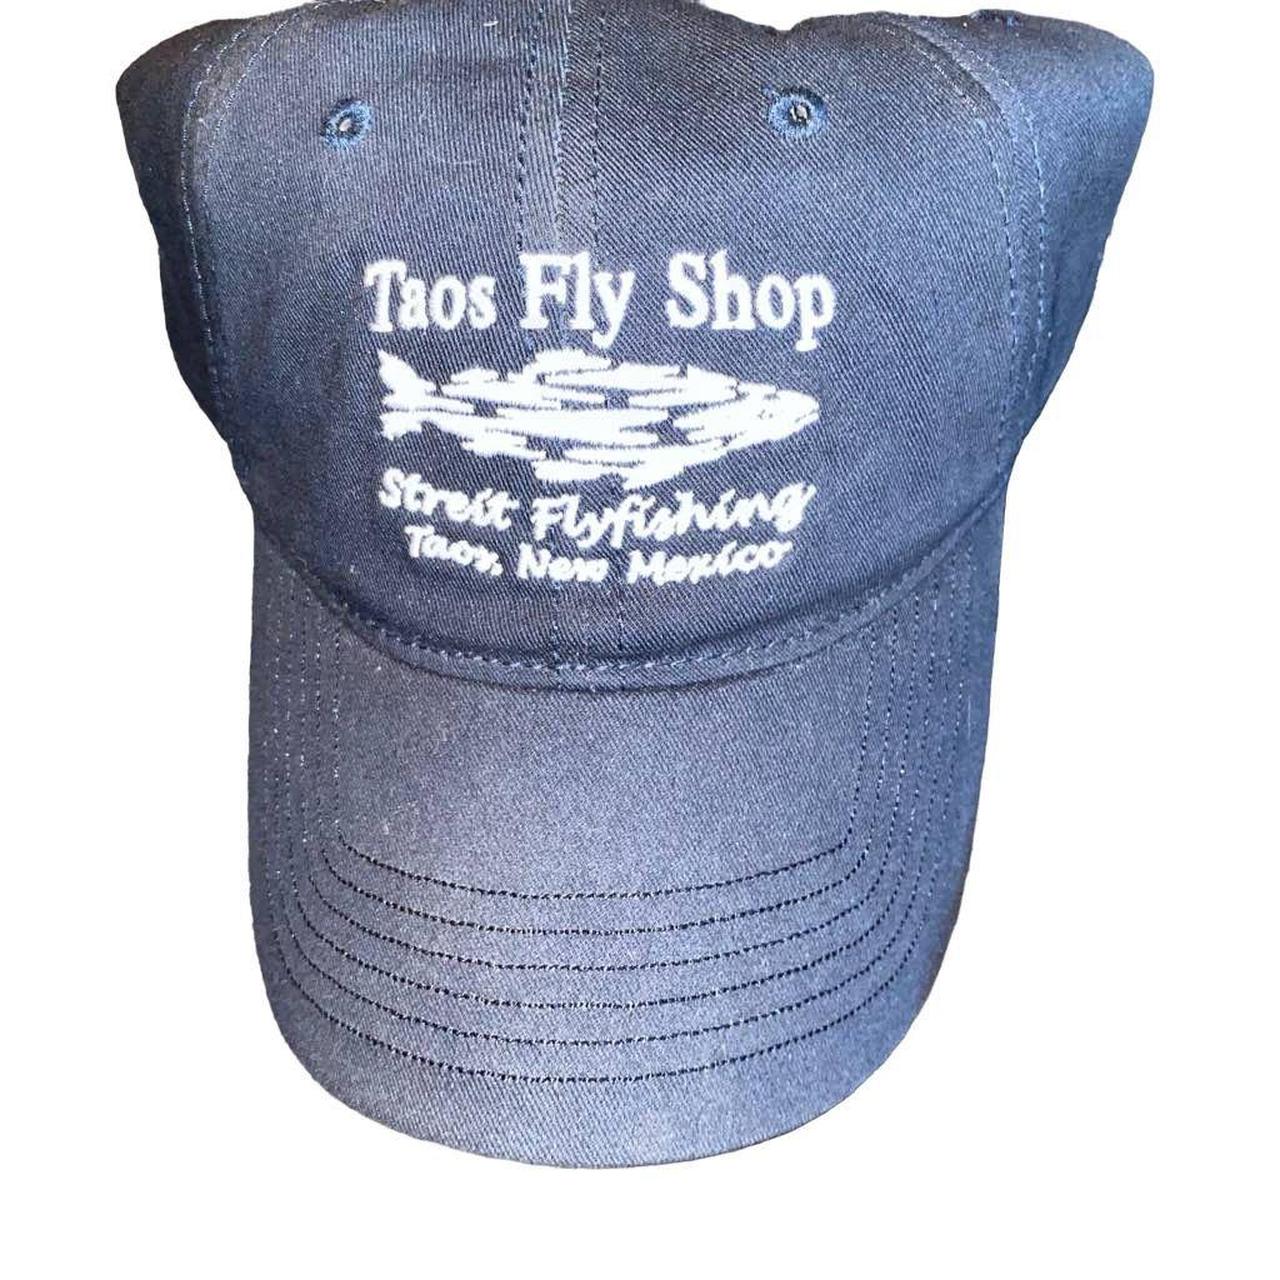 Taos Fly Shop fly fishing hat cap Ouray NWOT navy - Depop